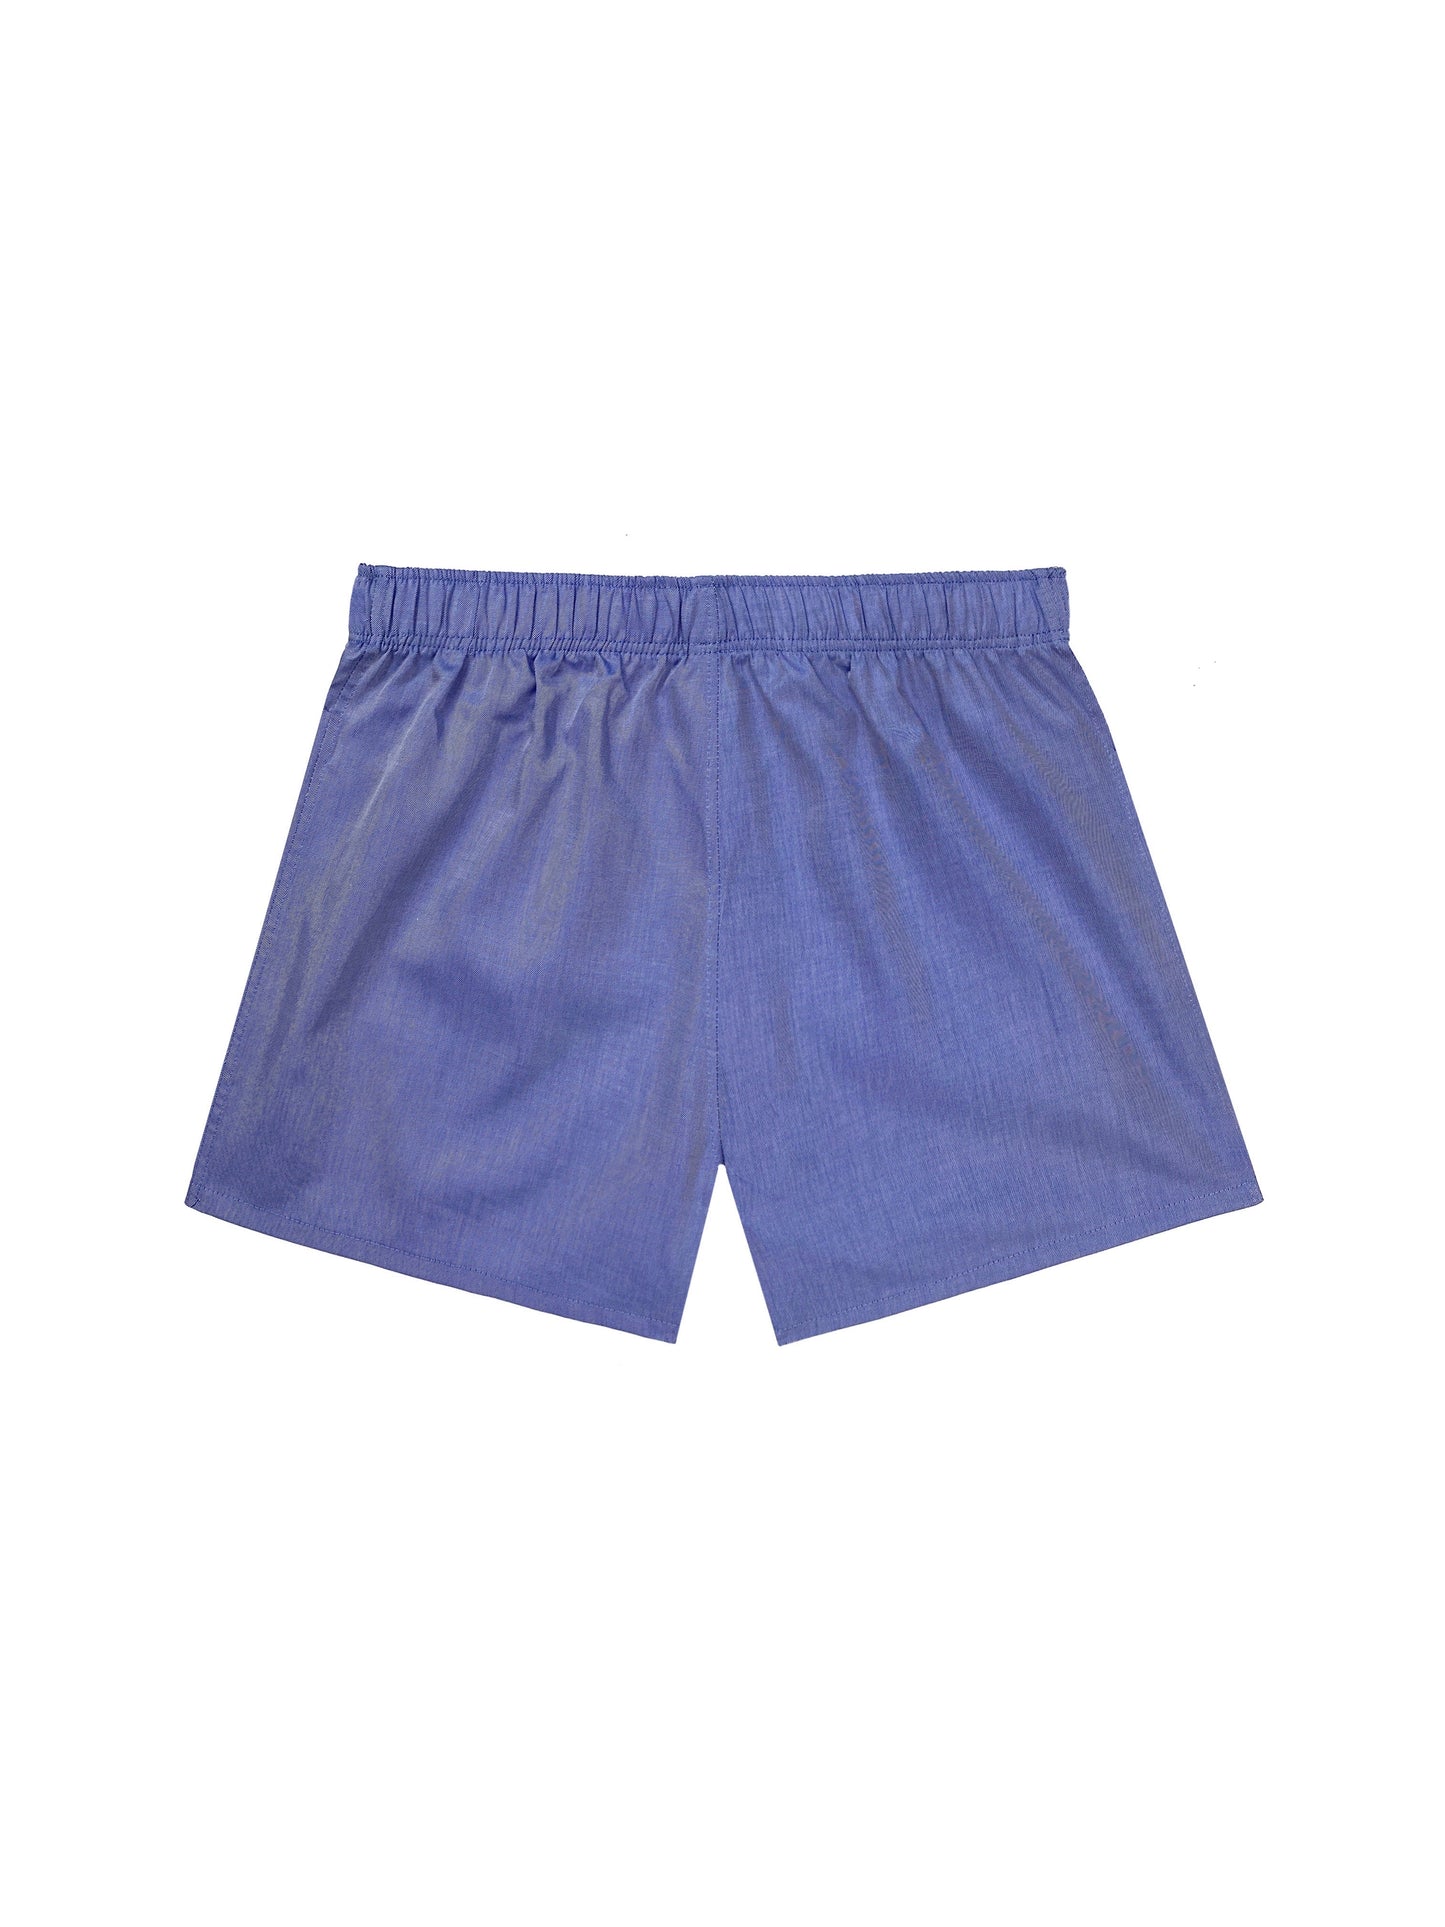 PACK OF 2 COTTON BOXERS